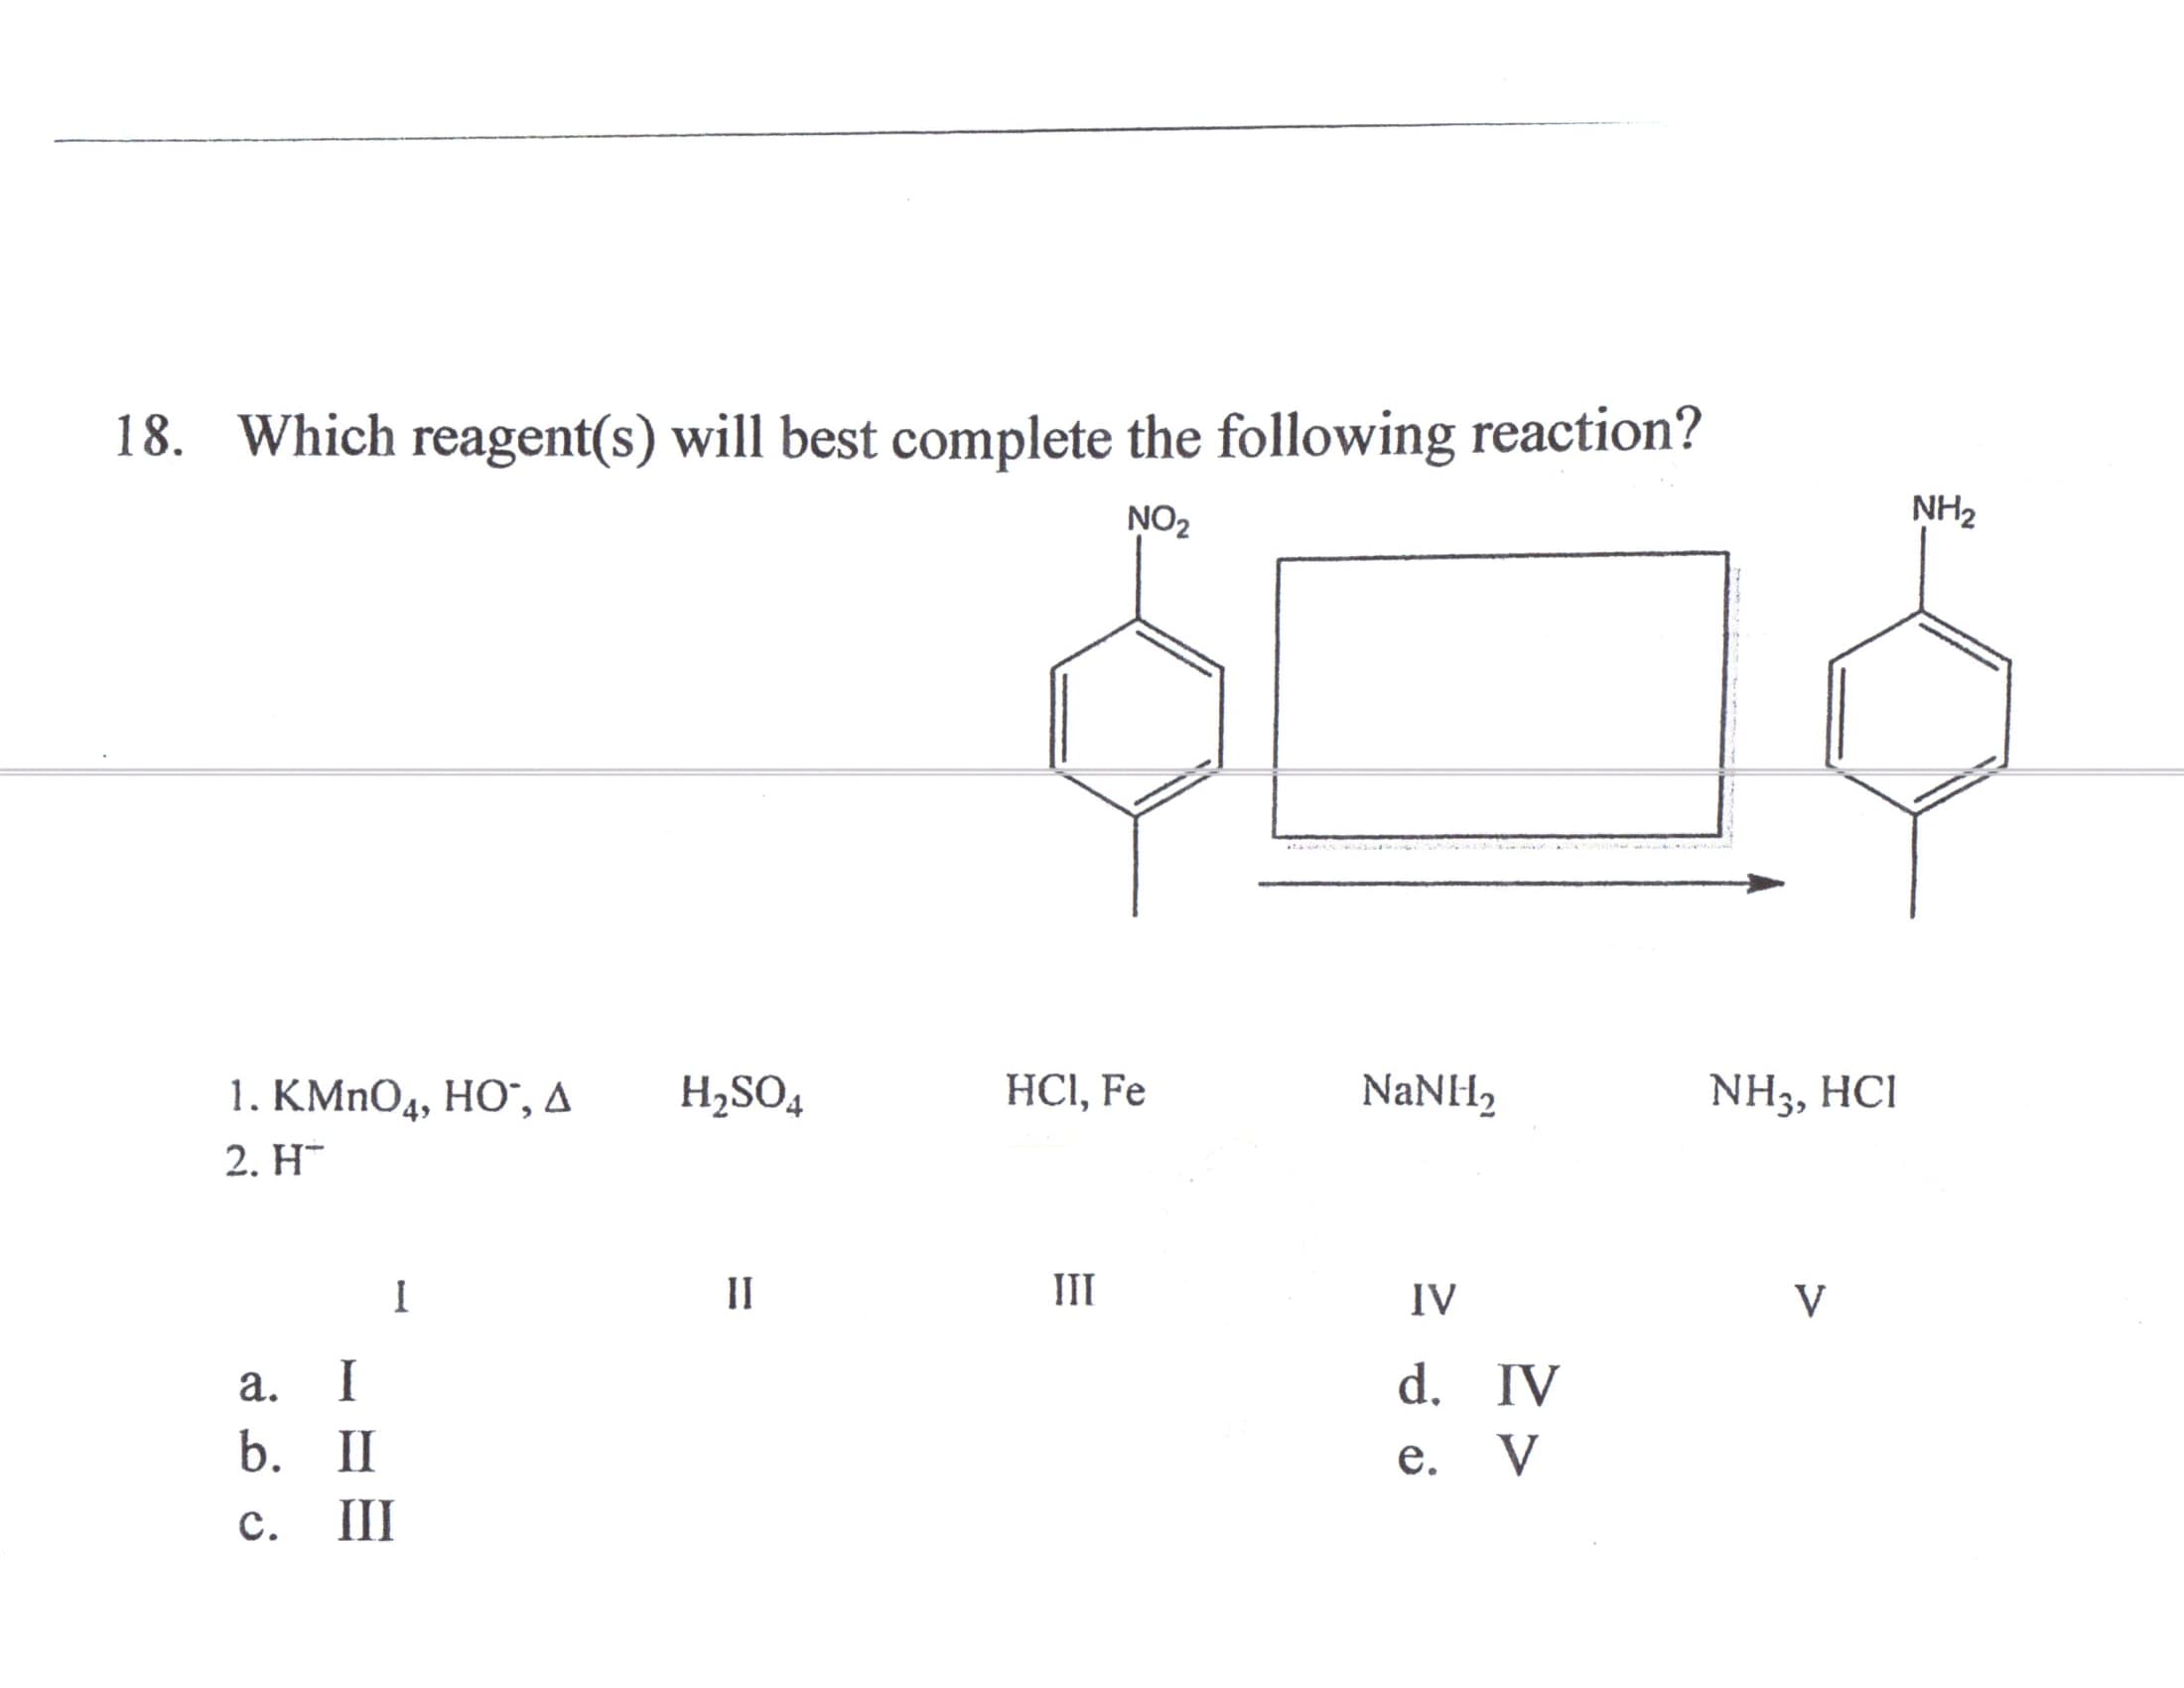 18. Which reagent(s) will best complete the following reaction?
NO2
NH2
H2SO4
HCI, Fe
NaNH,
NH3, HCI
1. KMnOд, НО", д
2. H¯
II
III
IV
V
d. IV
е. V
а.
I
b. II
с.
II
